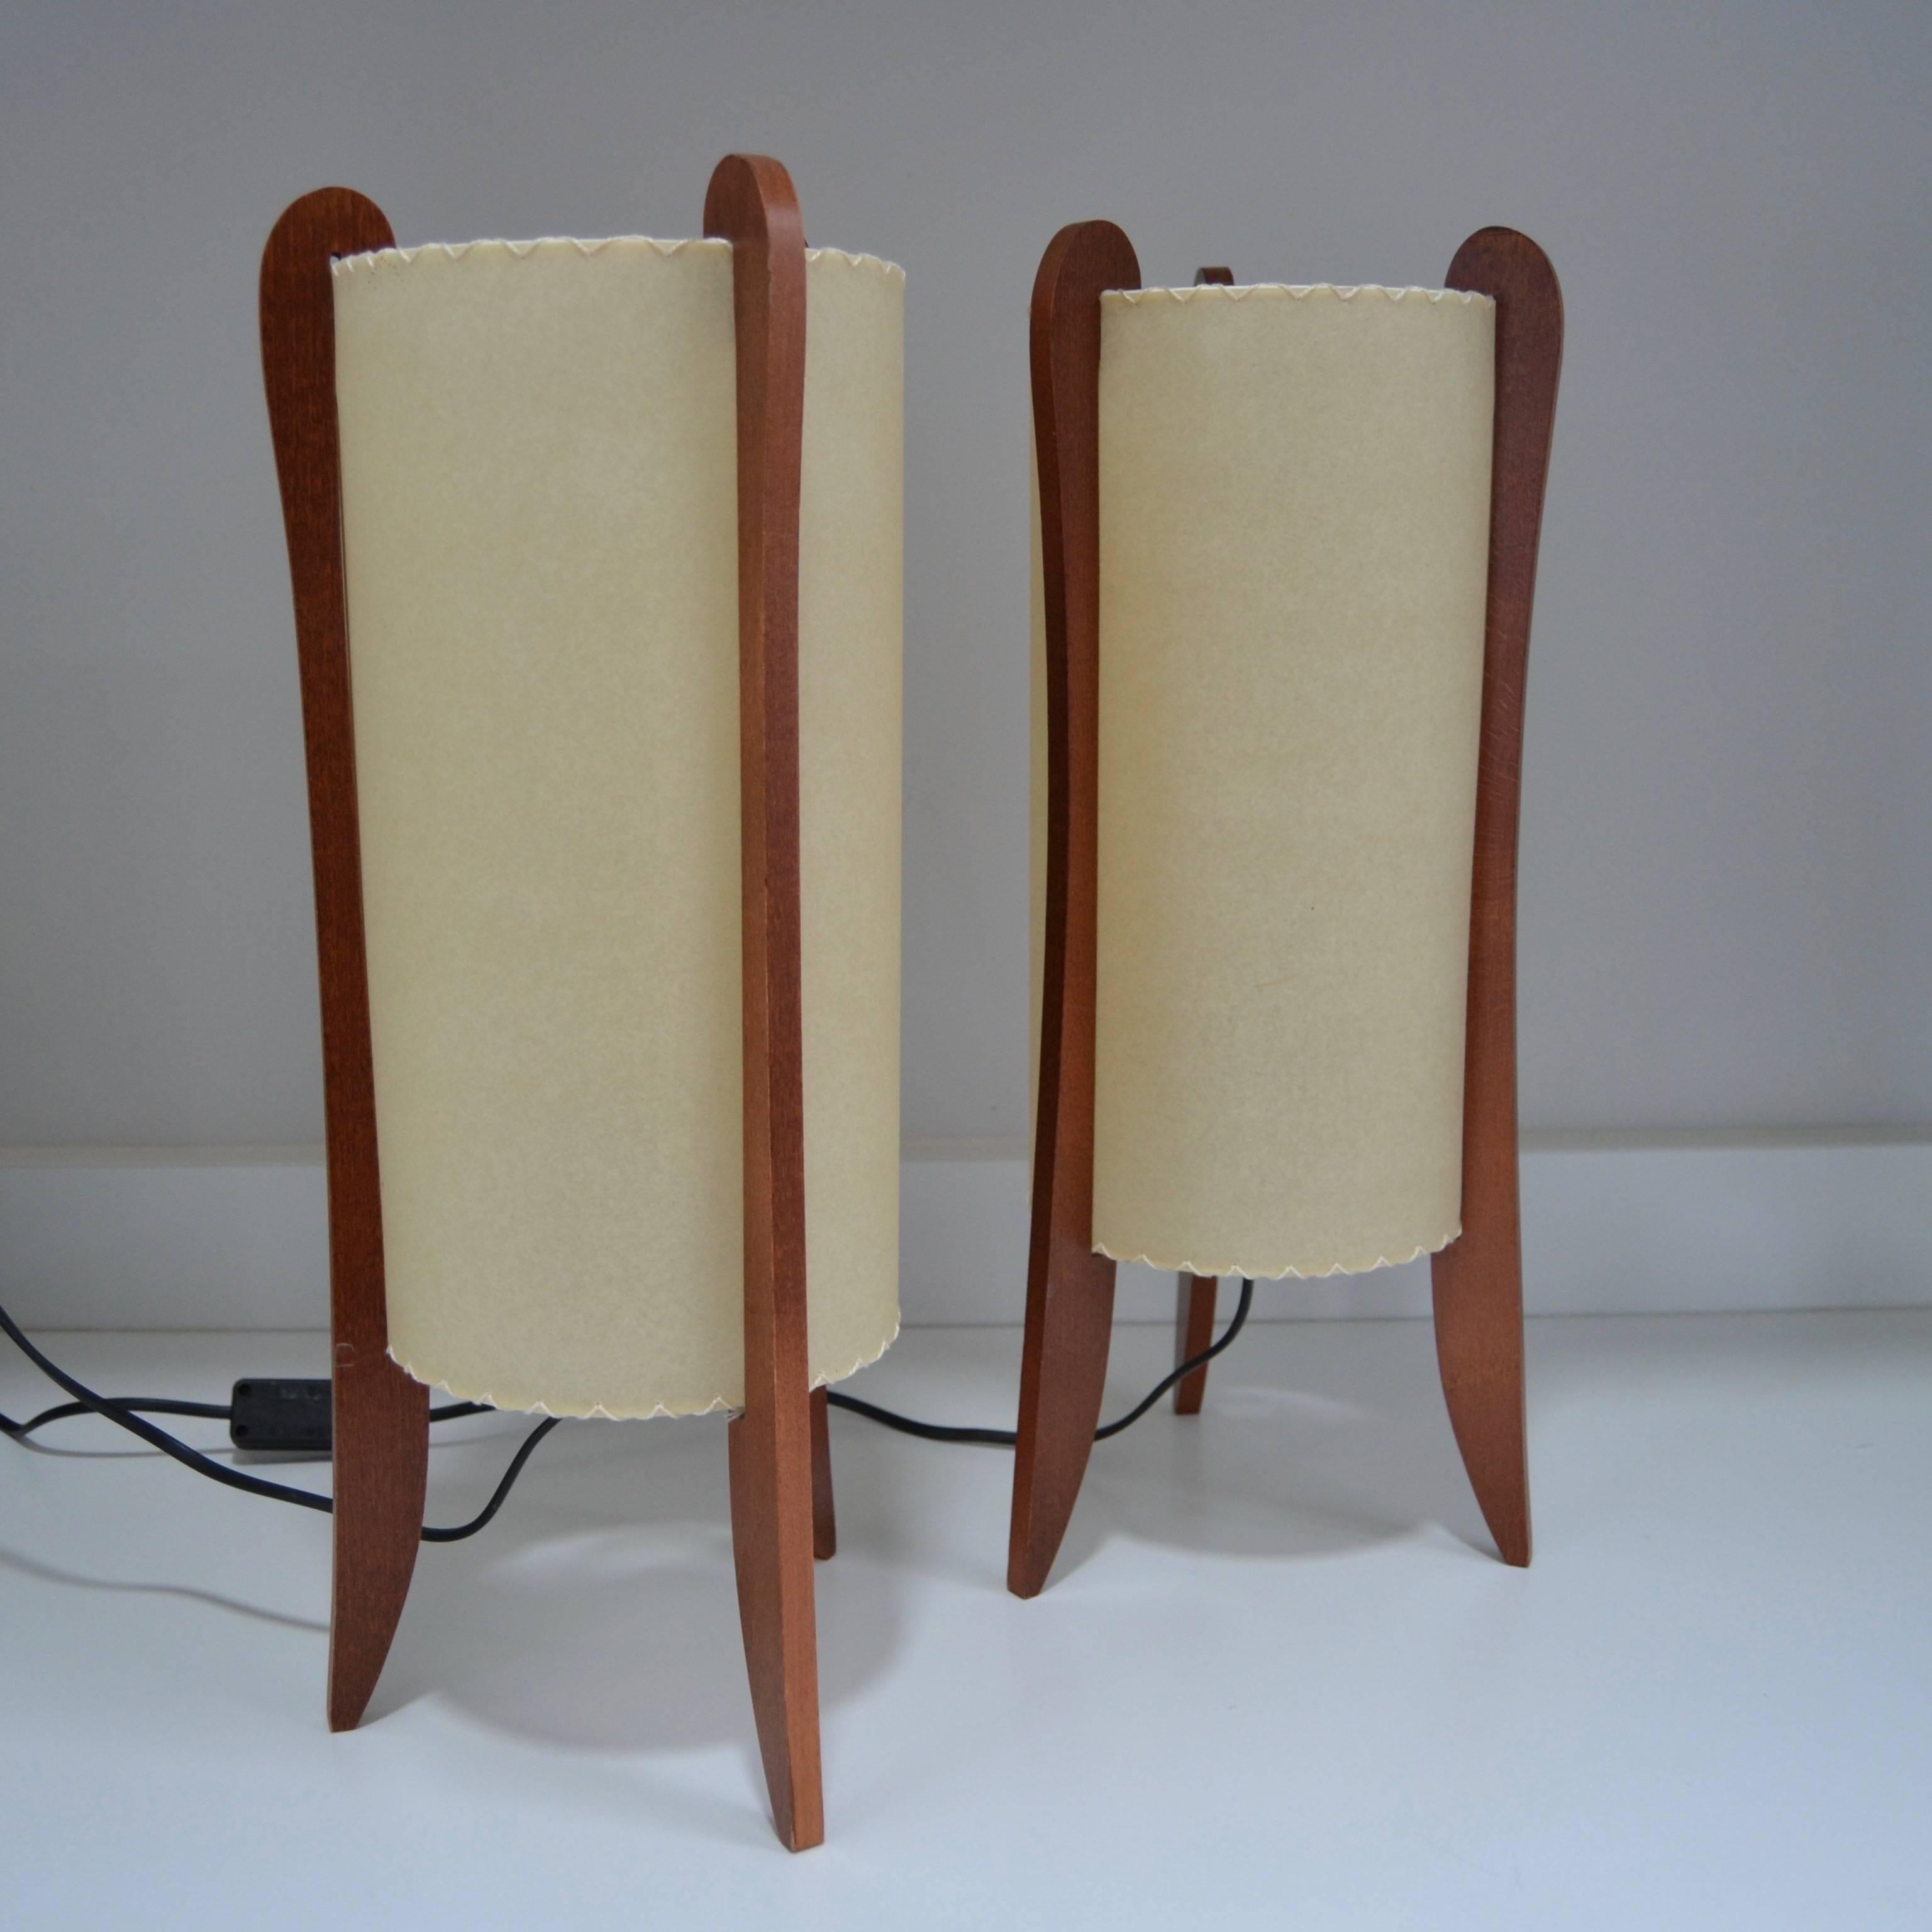 Pair of table lamps from late 1970s mahogany and goatskin shades
Great vintage condition.